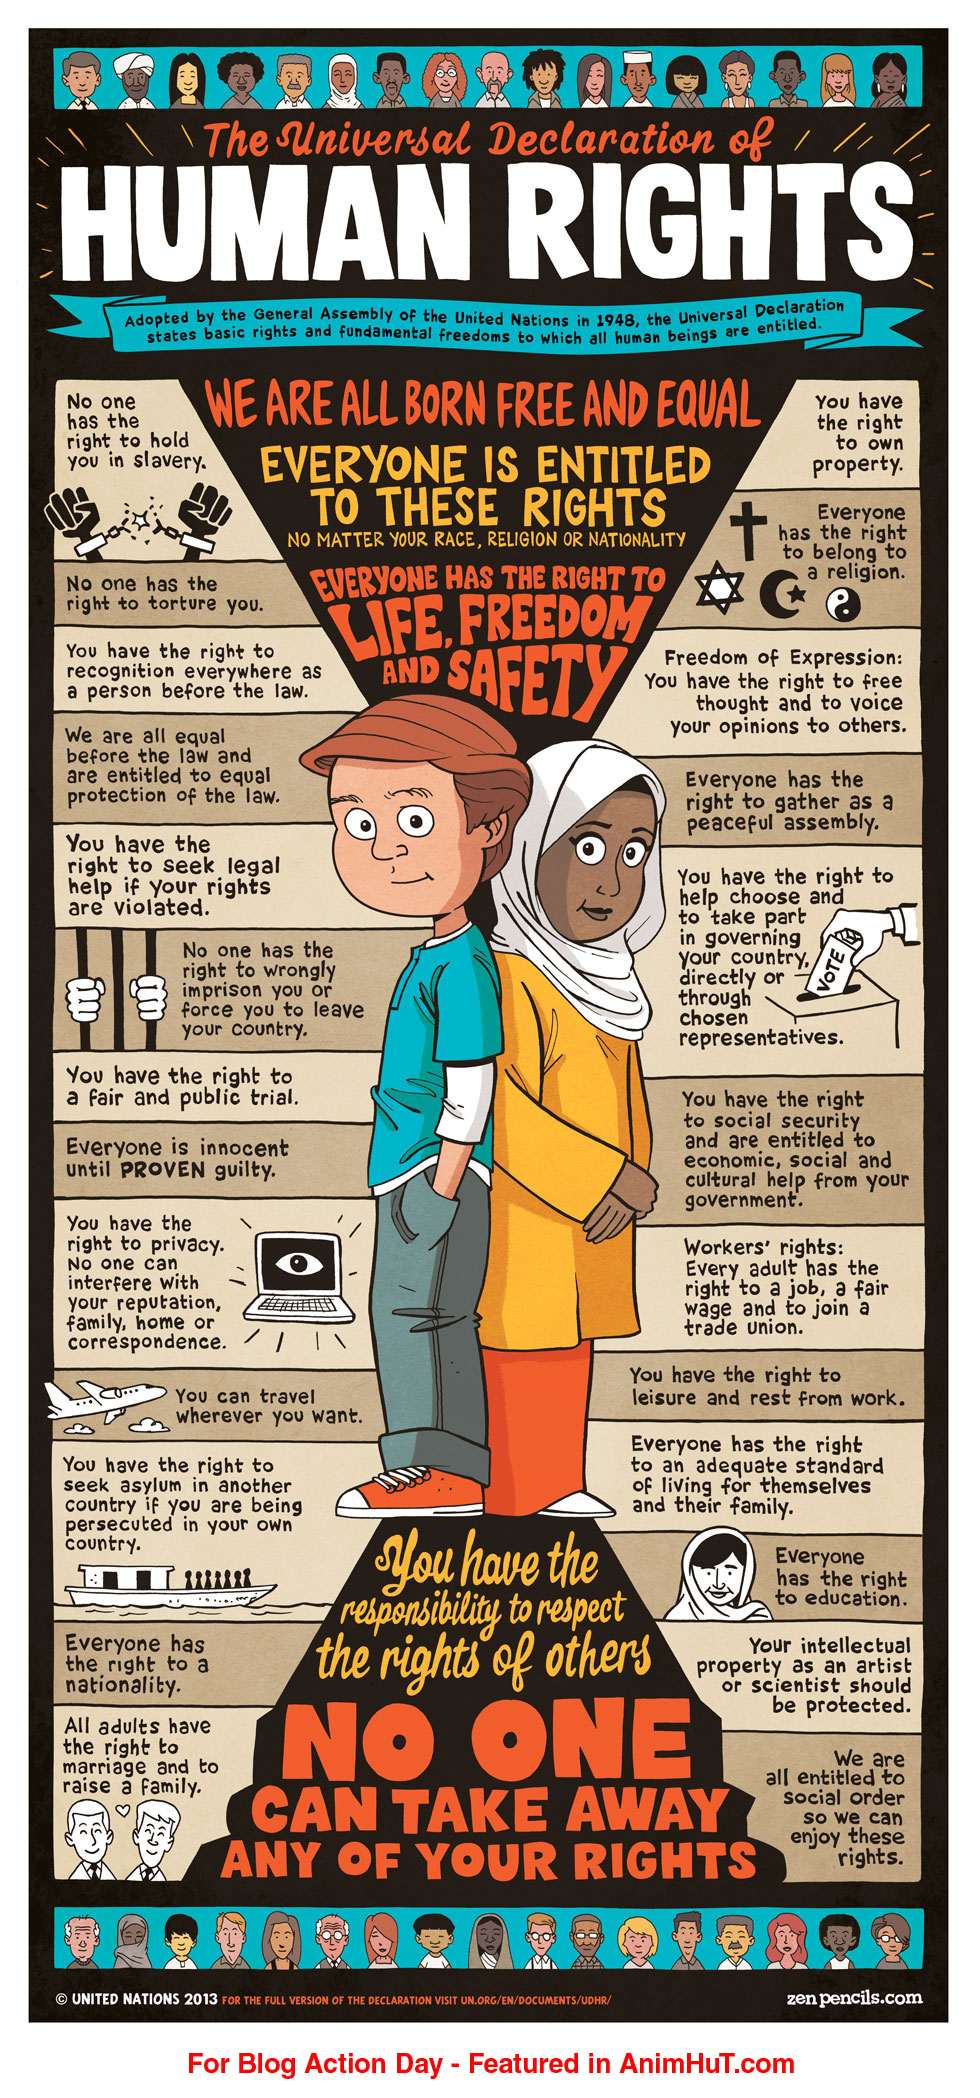 Human Rights and  Civil Rights poster design